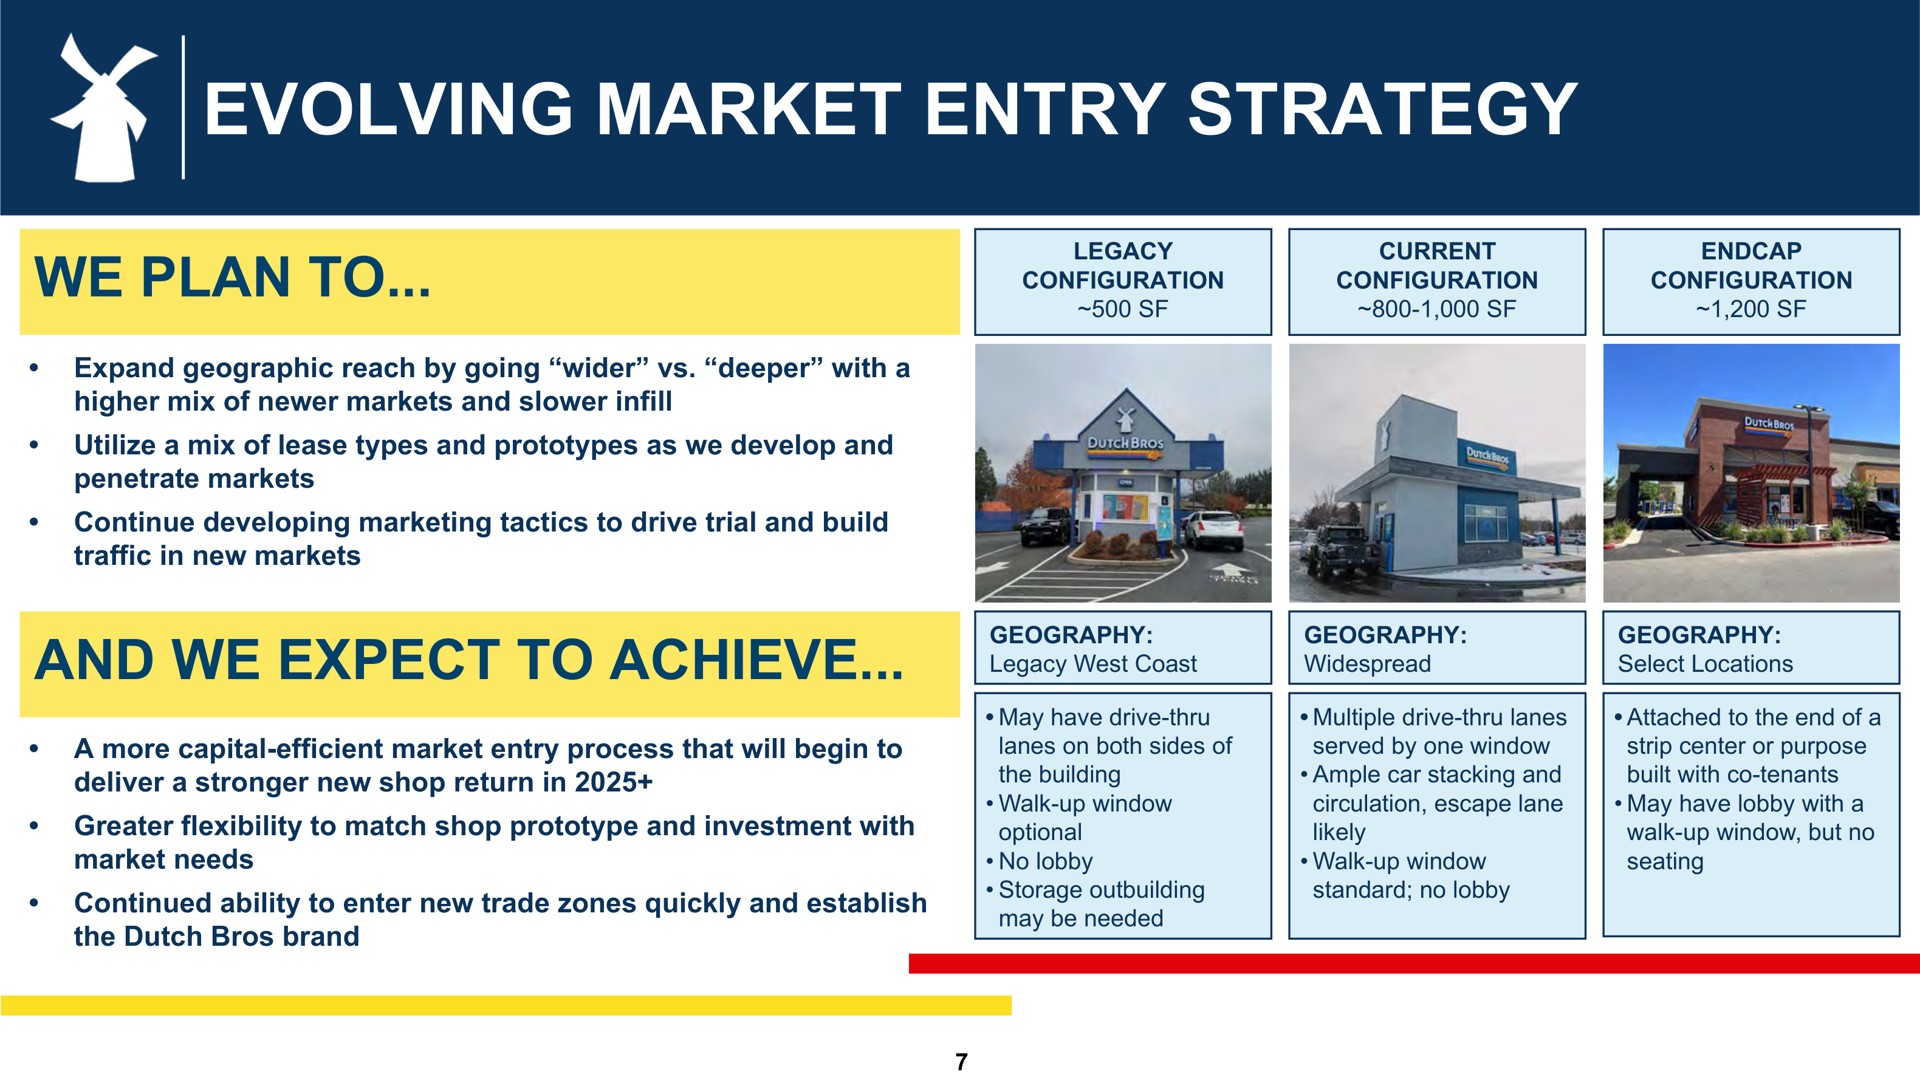 evolving market entry strategy we plan to and we expect to achieve | Dutch Bros